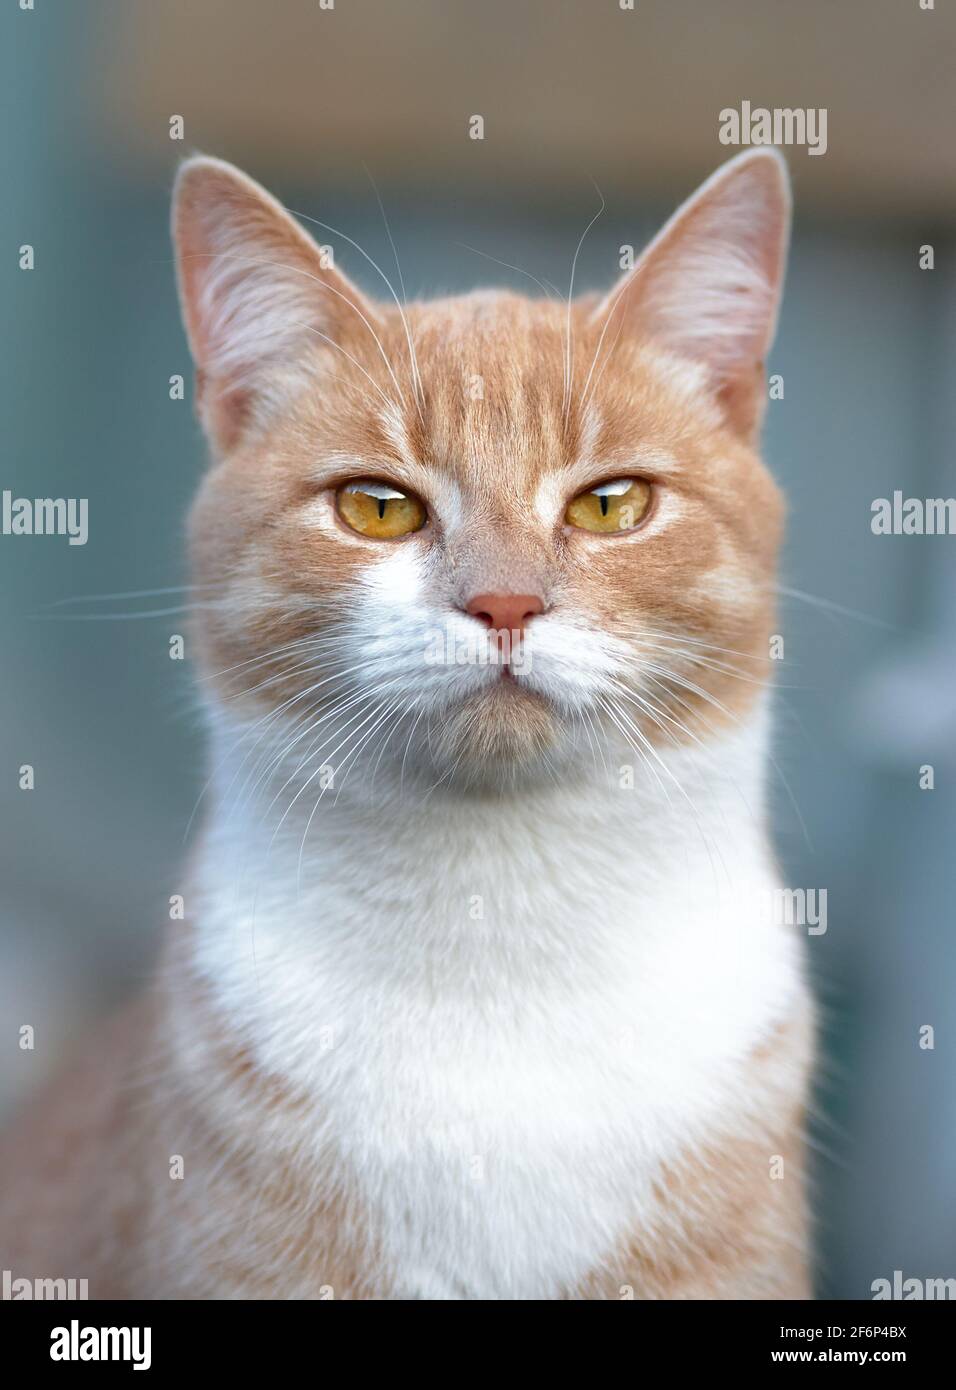 Beautiful portrait of a ginger cat Stock Photo